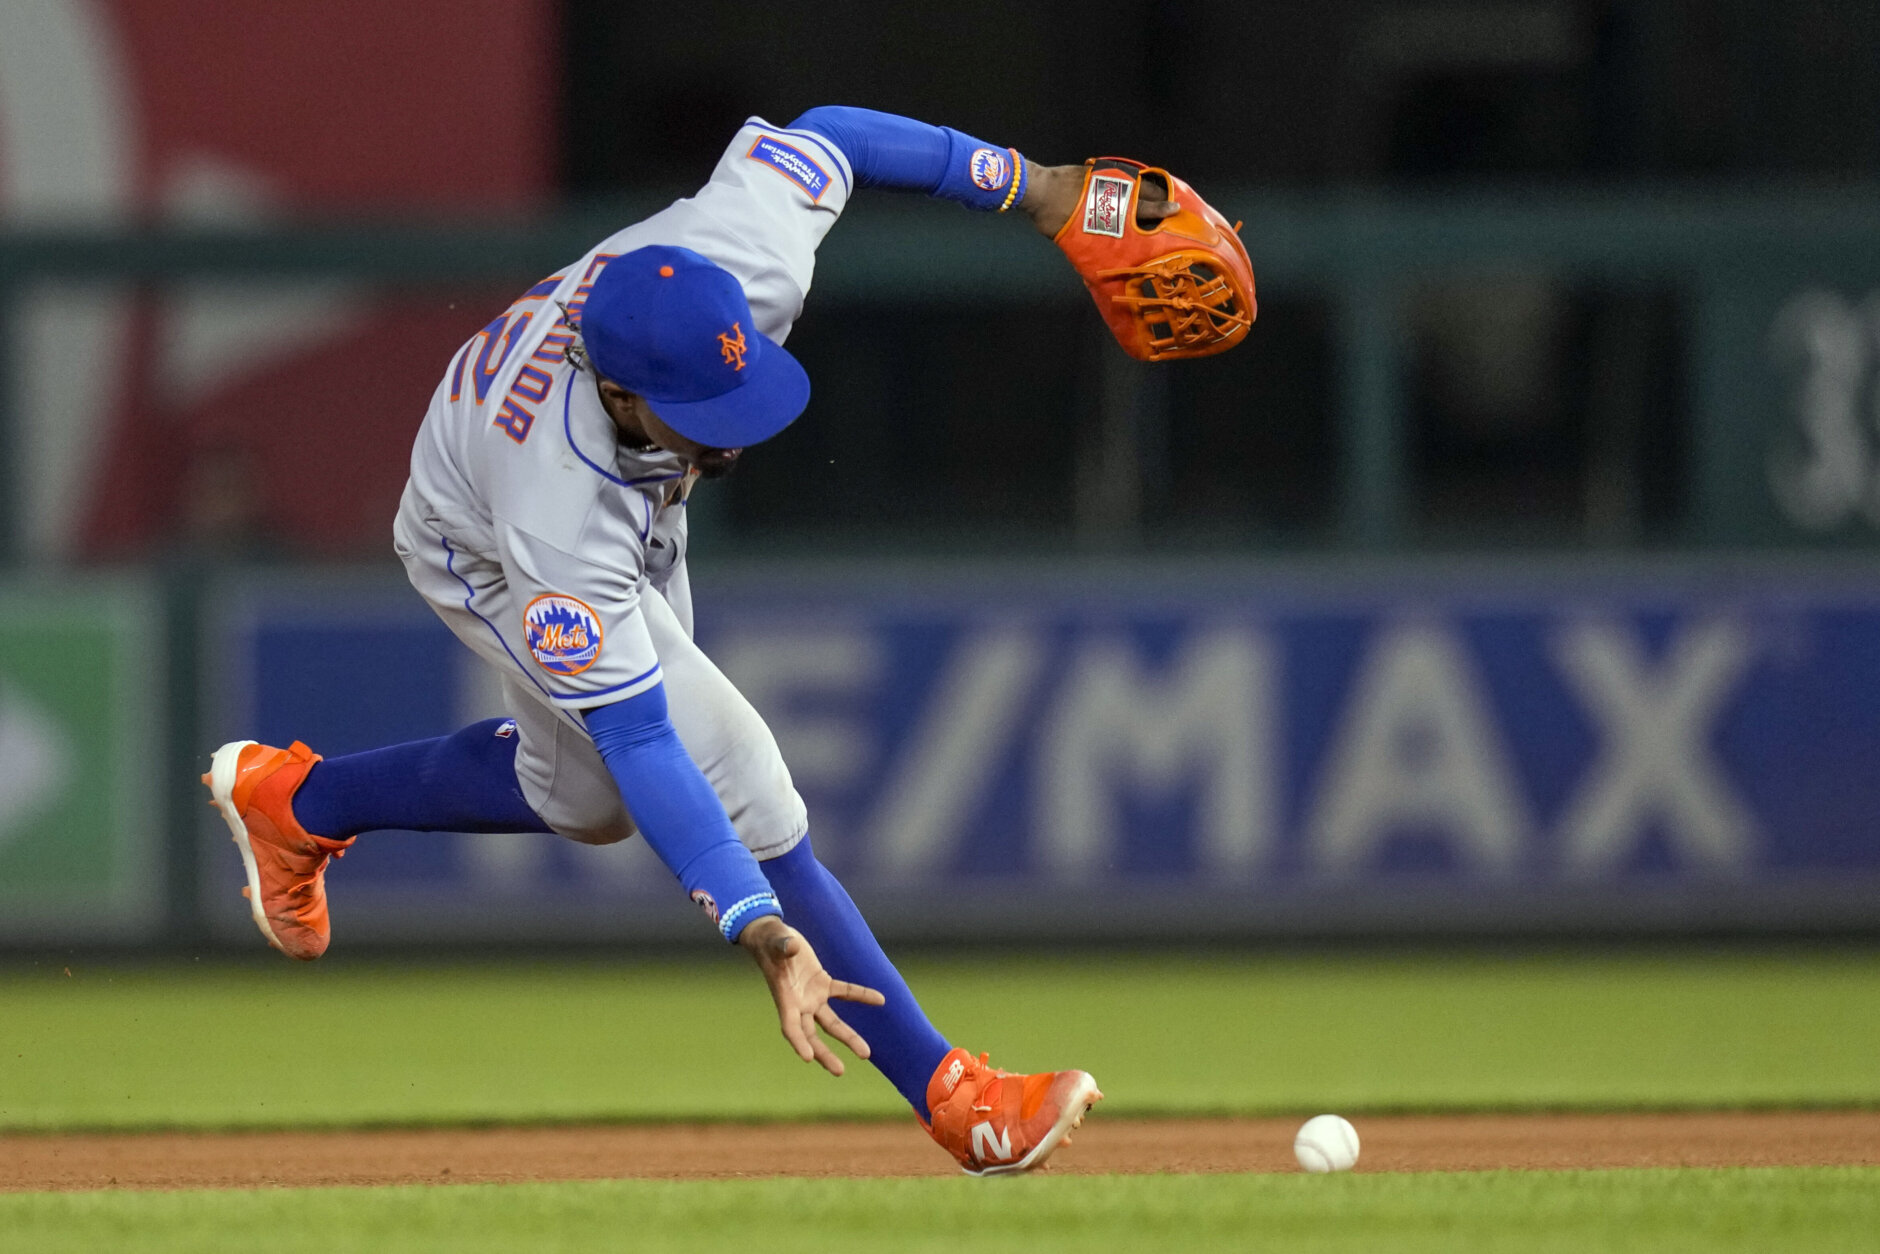 New York Mets shortstop Francisco Lindor fields a ball bare-handed before throwing to first base for the out on Washington Nationals' Keibert Ruiz during the eighth inning of a baseball game at Nationals Park, Friday, May 12, 2023, in Washington. The Mets won 3-2. (AP Photo/Alex Brandon)